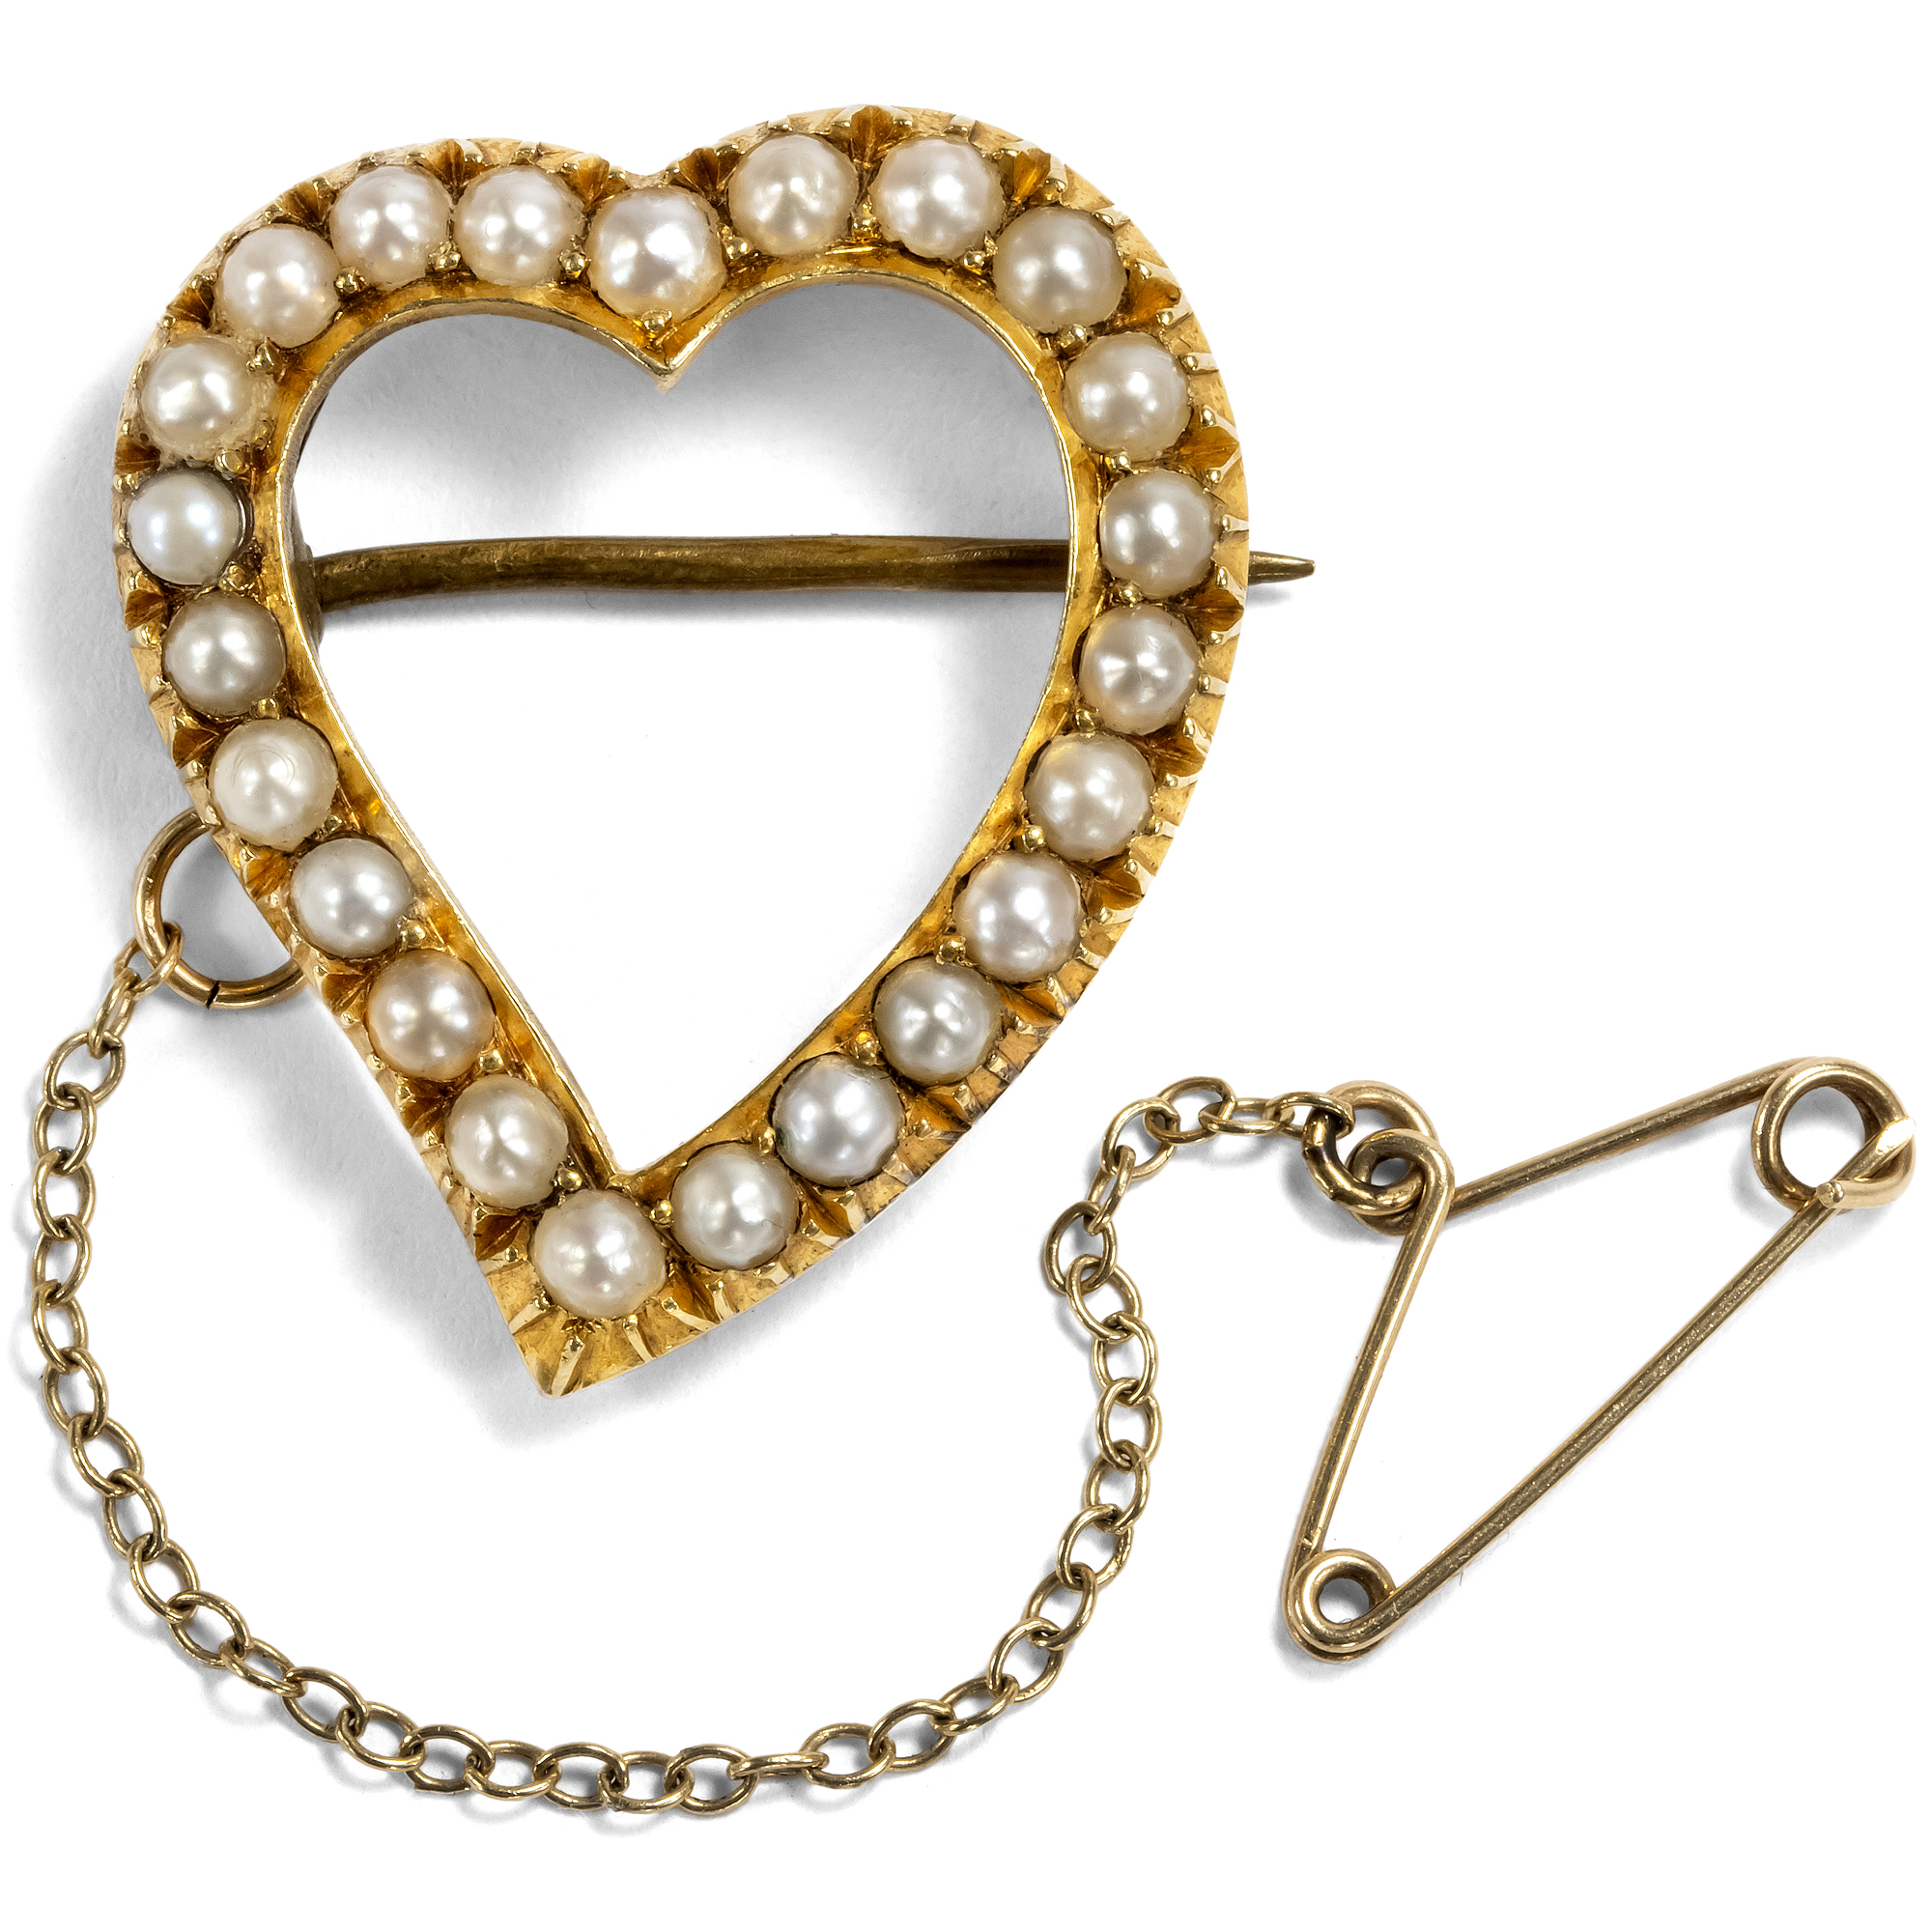 Victorian Brooch with Pearls in Gold, c. 1890